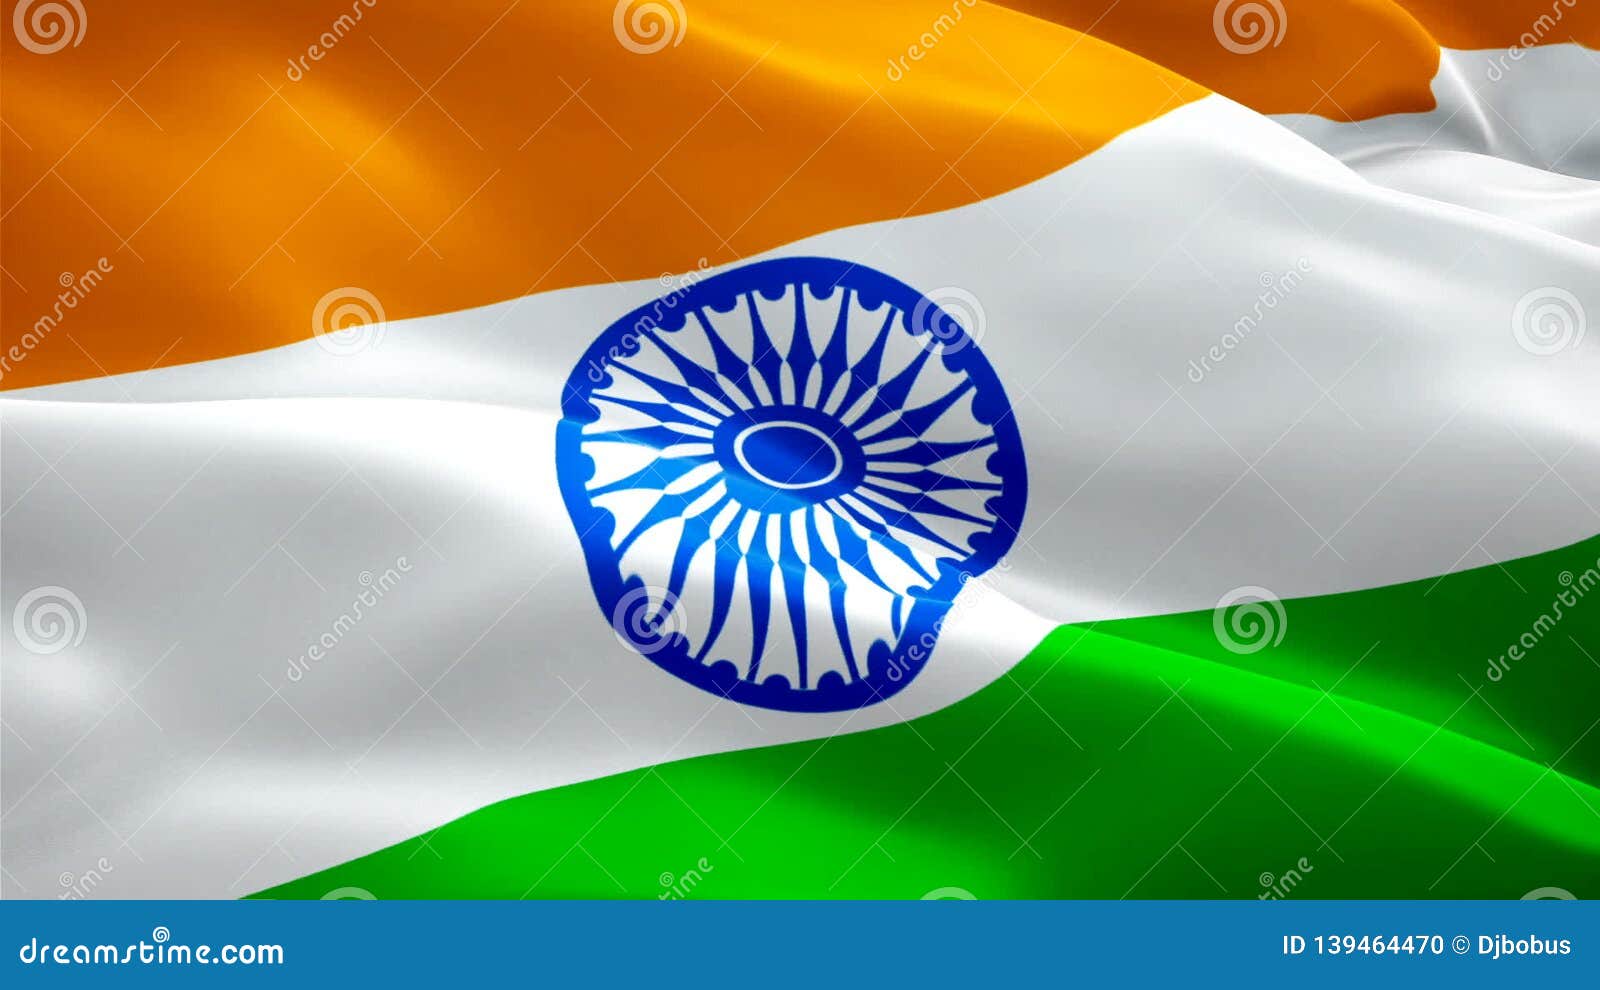 3d Animation India Flag Stock Footage & Videos - 279 Stock Videos